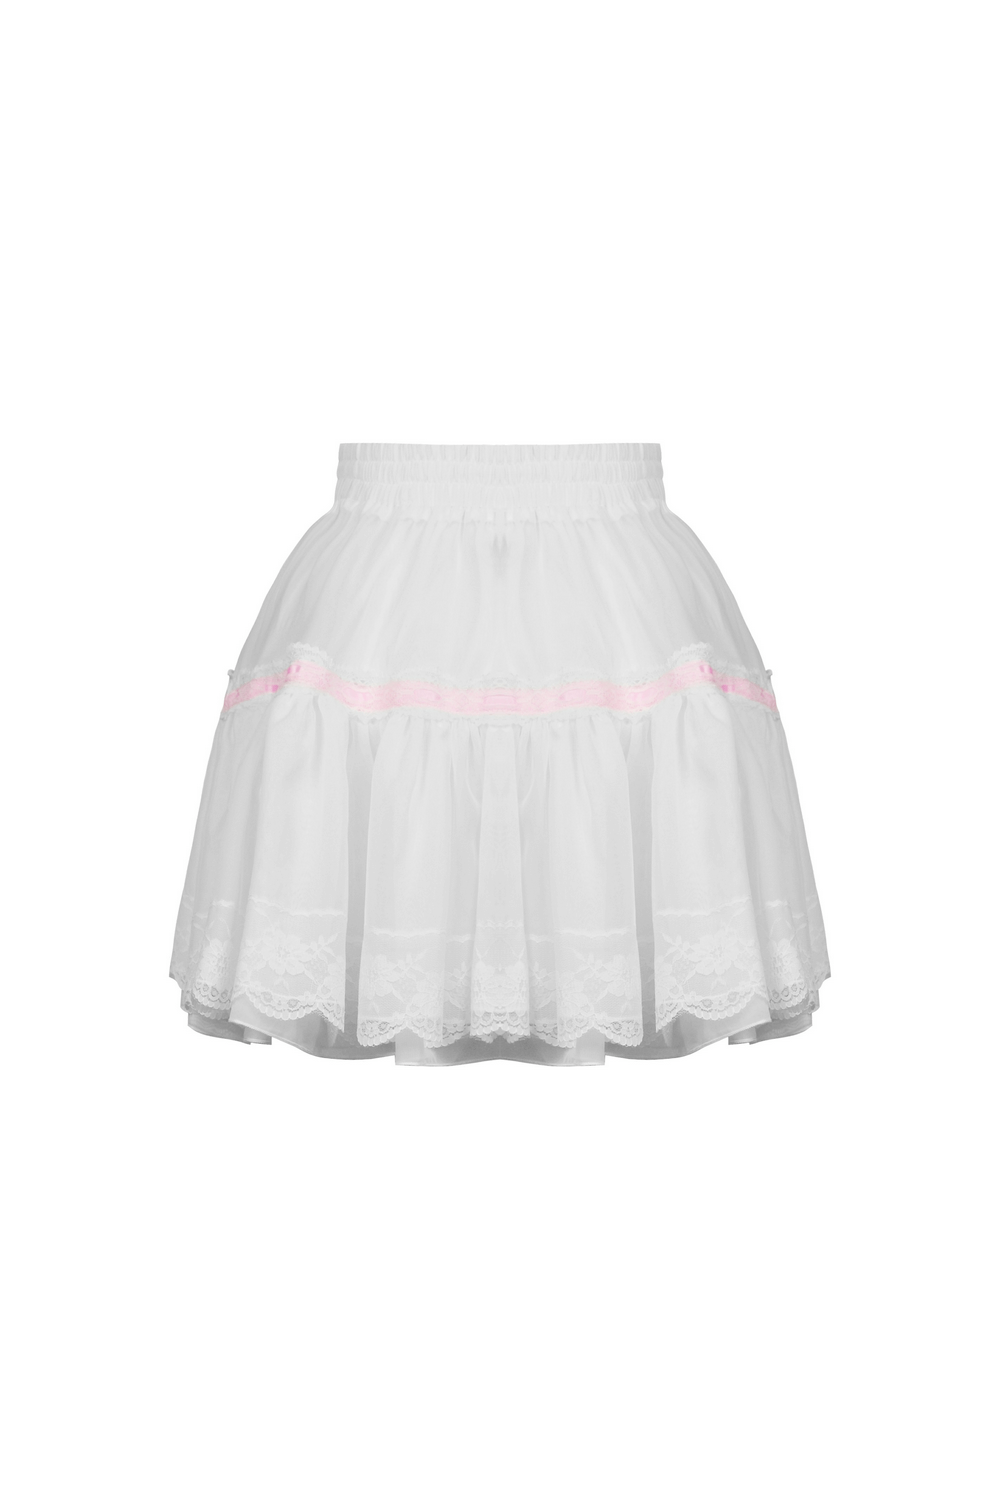 Sweet Lolita White Pleated Mini Skirt with Pink Bows